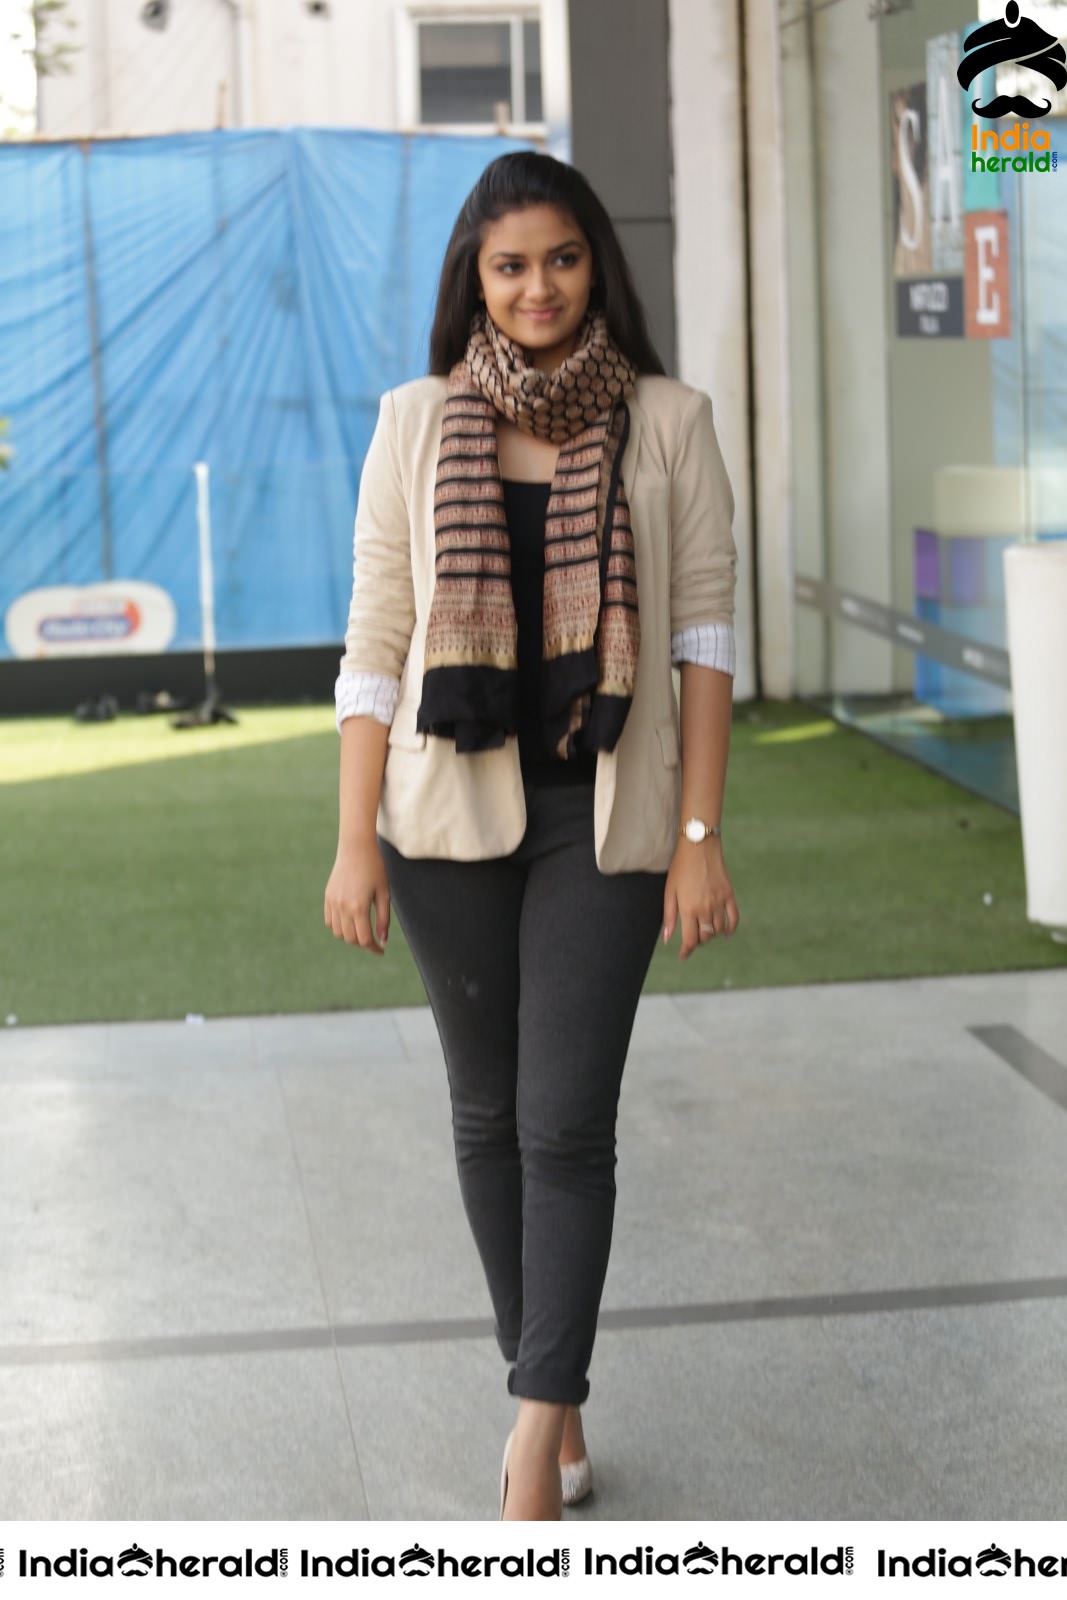 Keerthy Suresh Looking So Beautiful with a Scarf Around her Neck Set 1